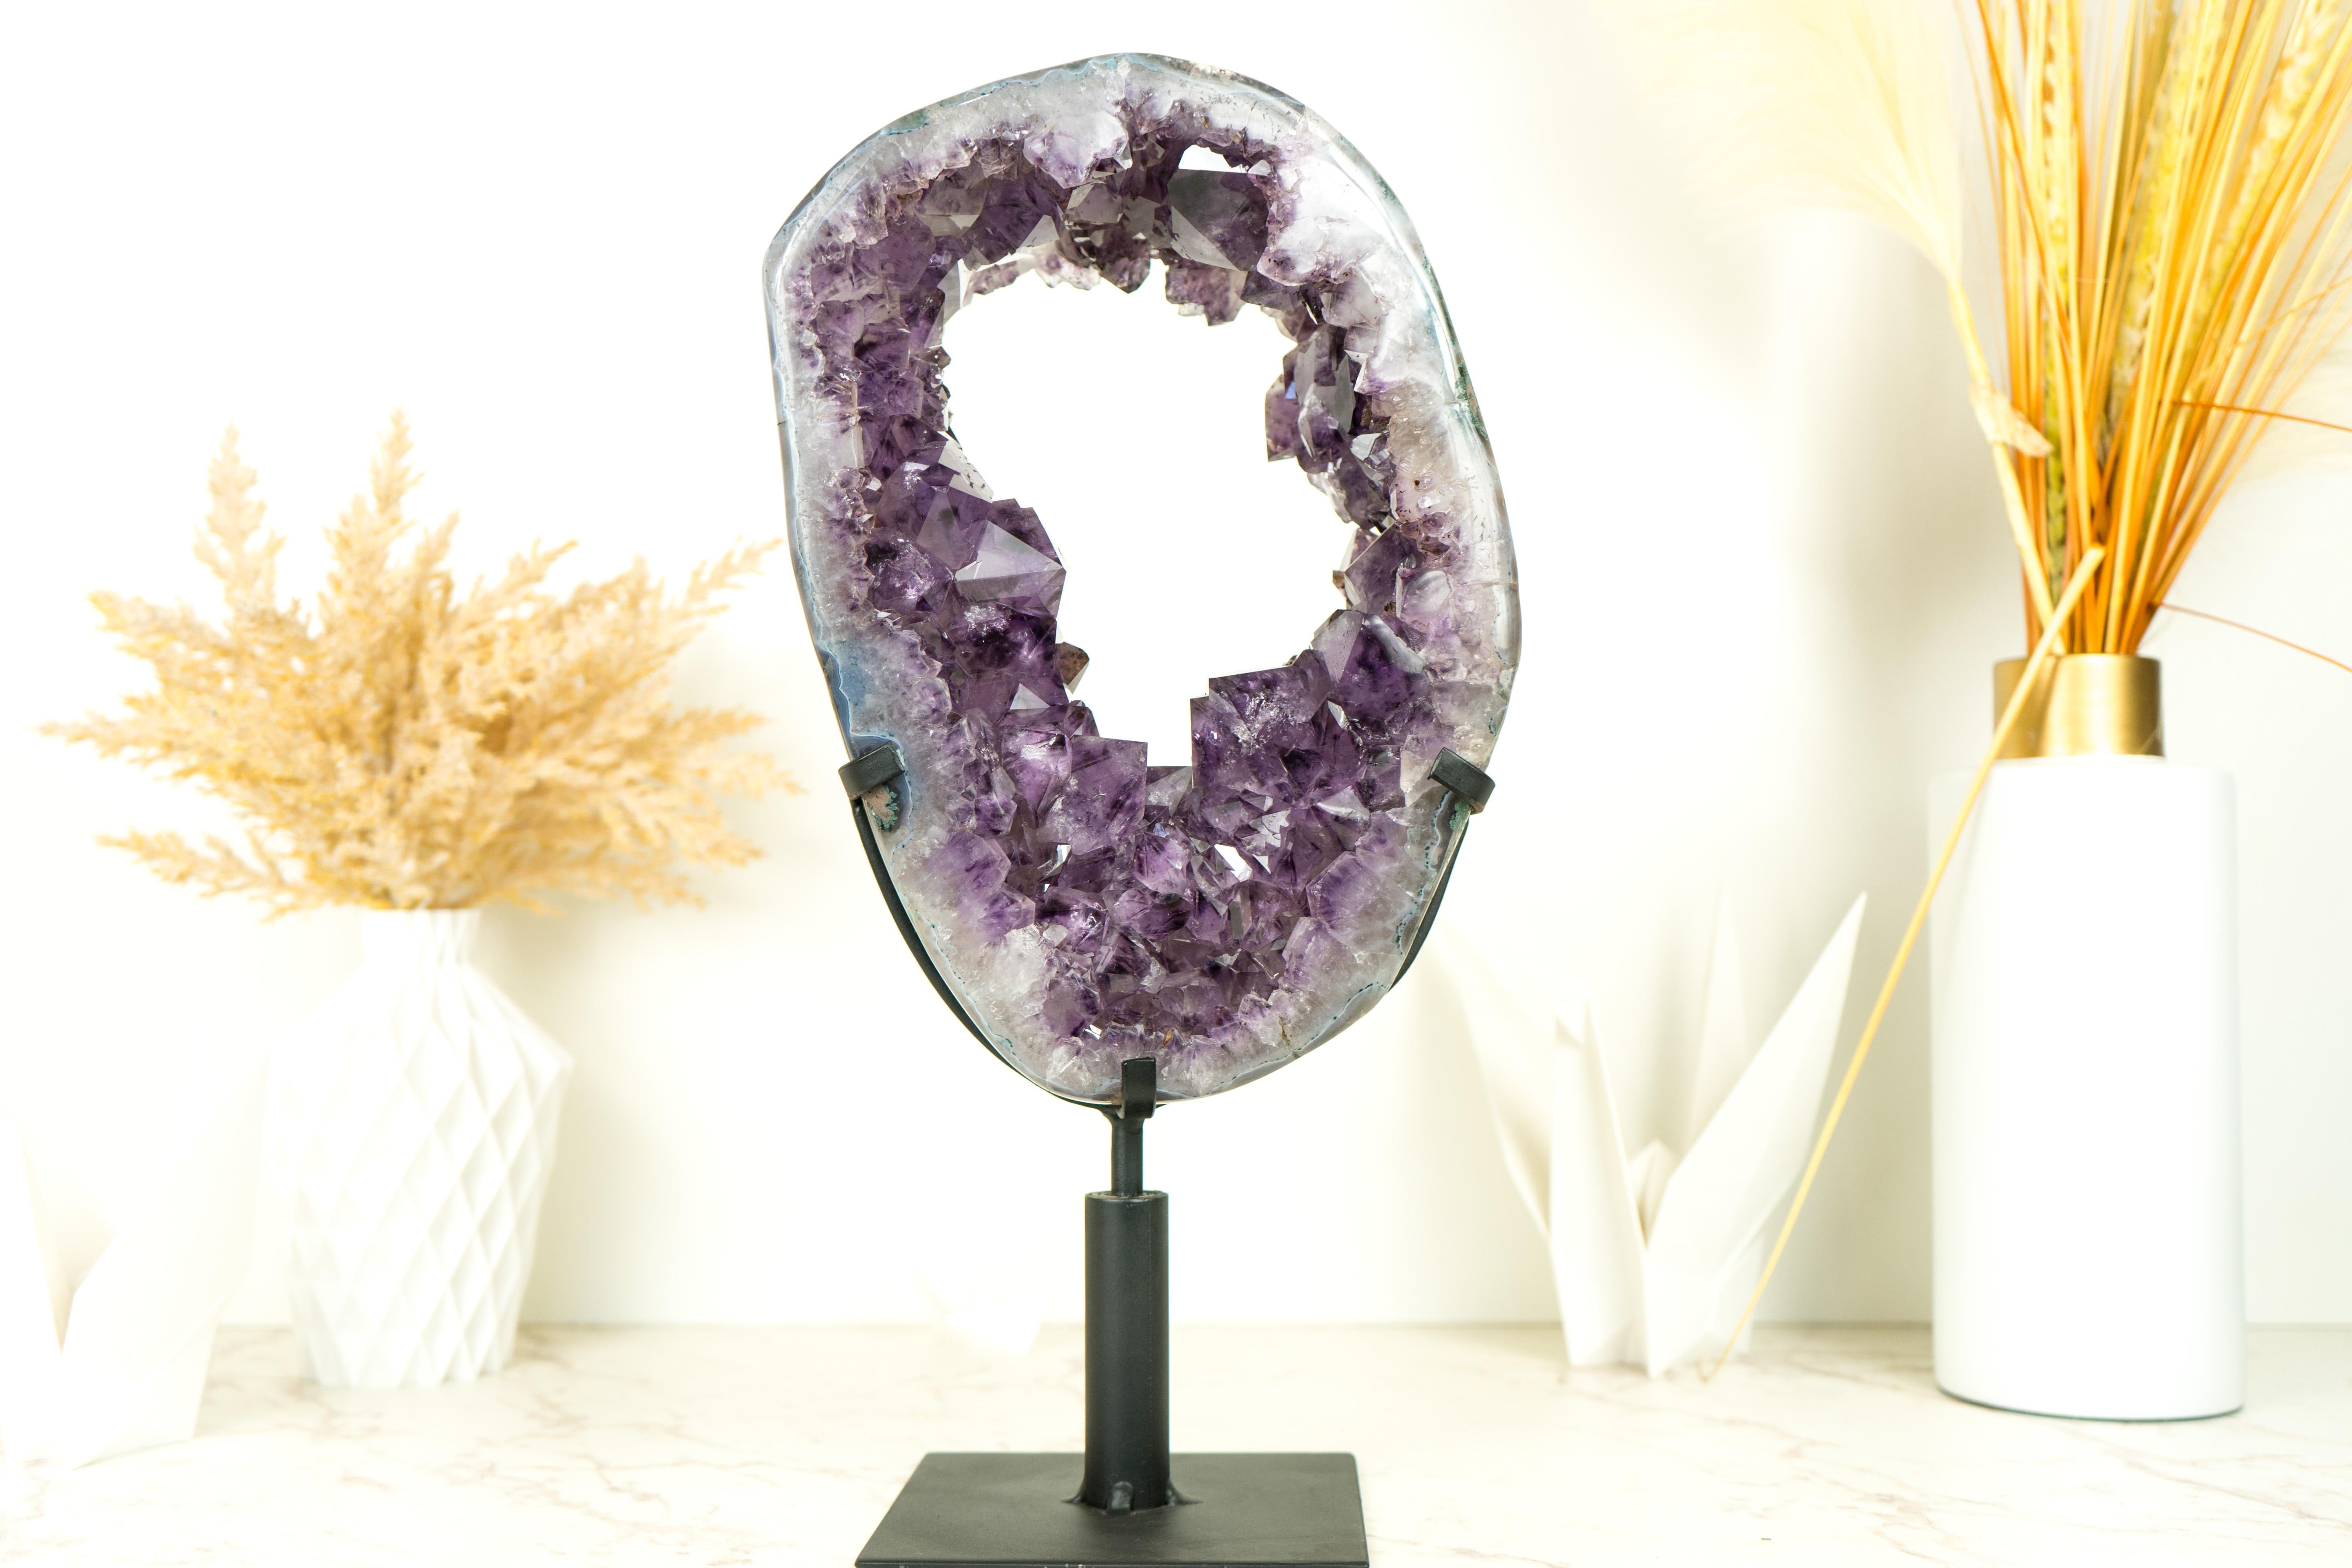 Amethyst Geodes with Crown Formations are a rare form of Amethyst found exclusively in one mine. Unlike the usual amethyst druzy Formations, these geodes exhibit crystal points that create a crown-like structure, making them truly exceptional